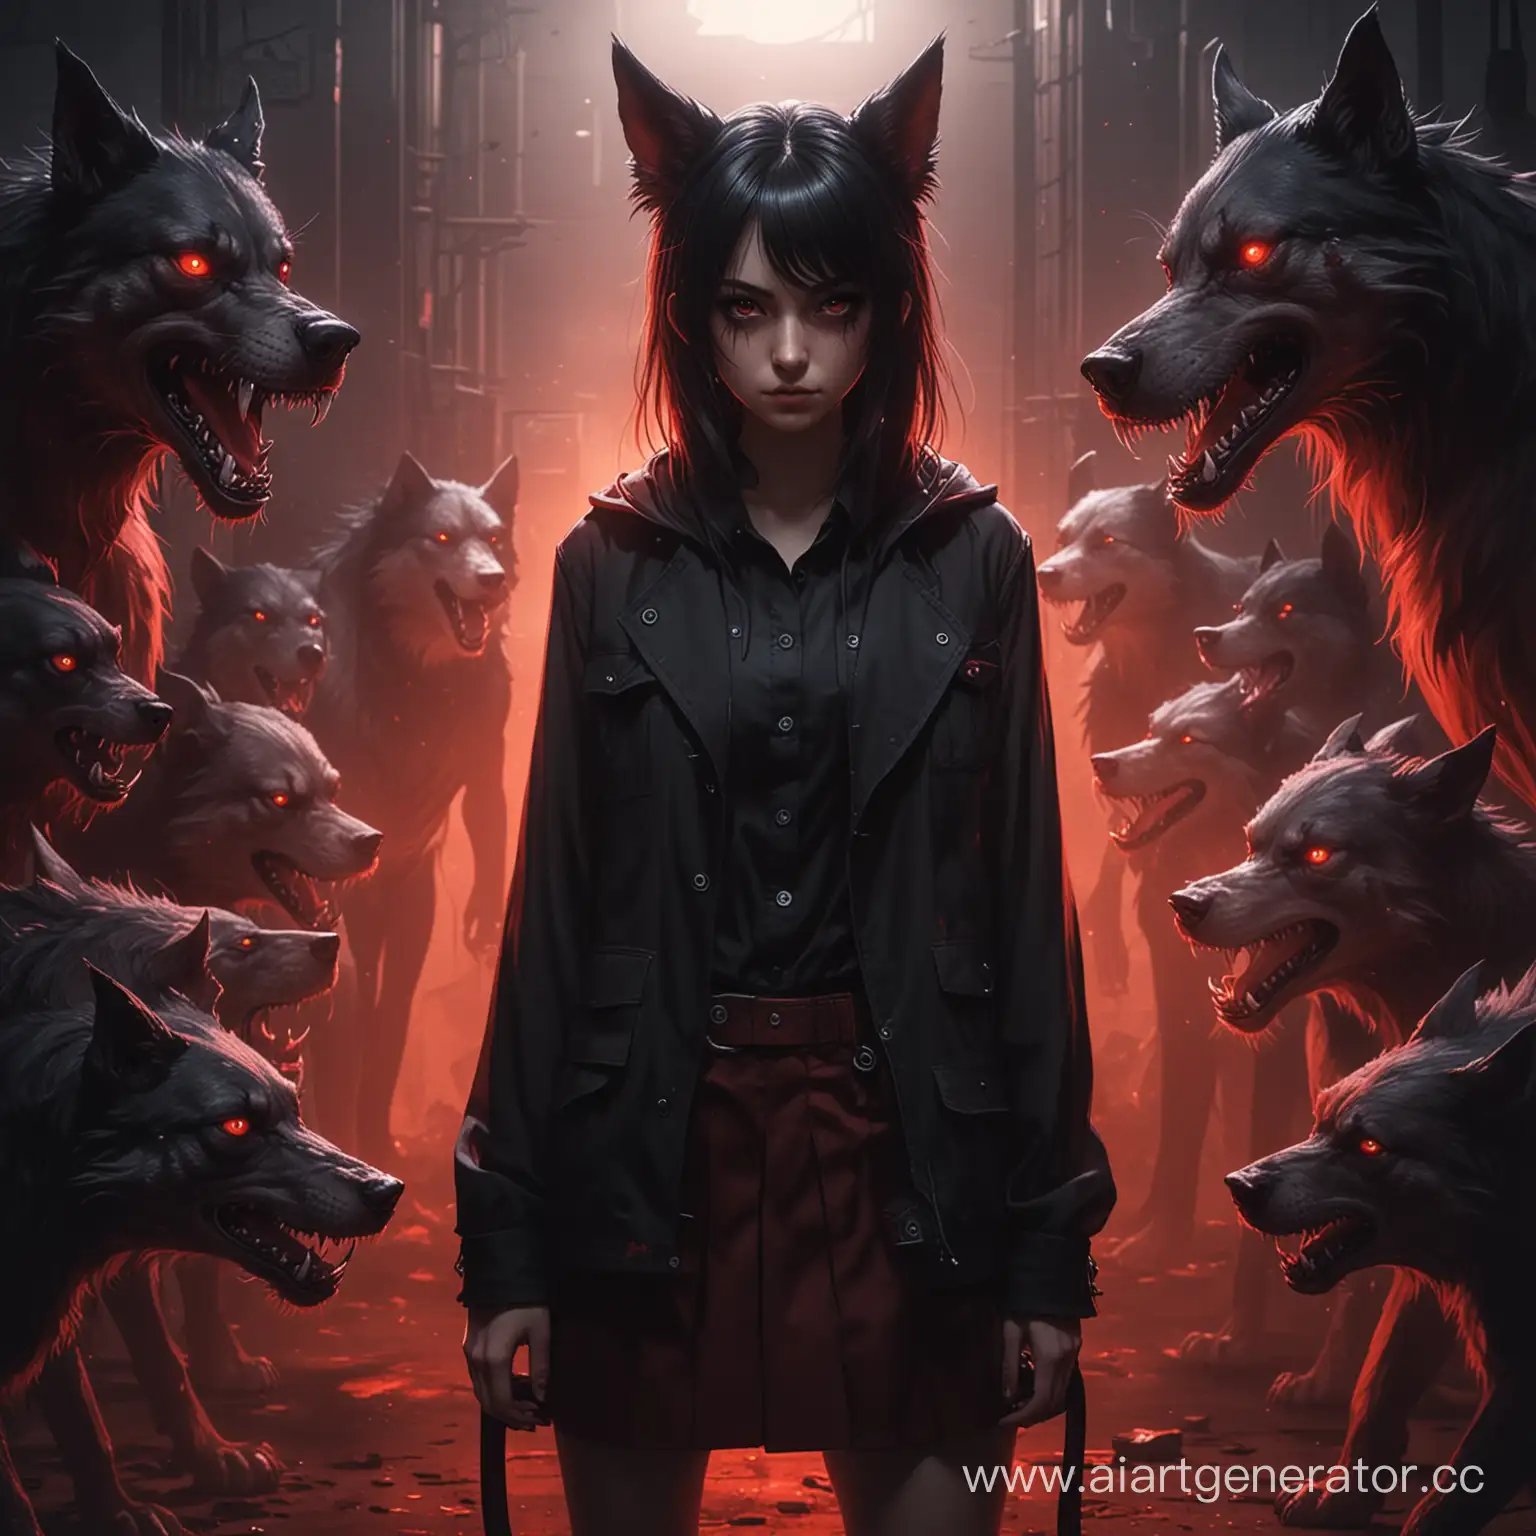 Dark-Fantasy-Anime-Girl-with-Angry-Dogs